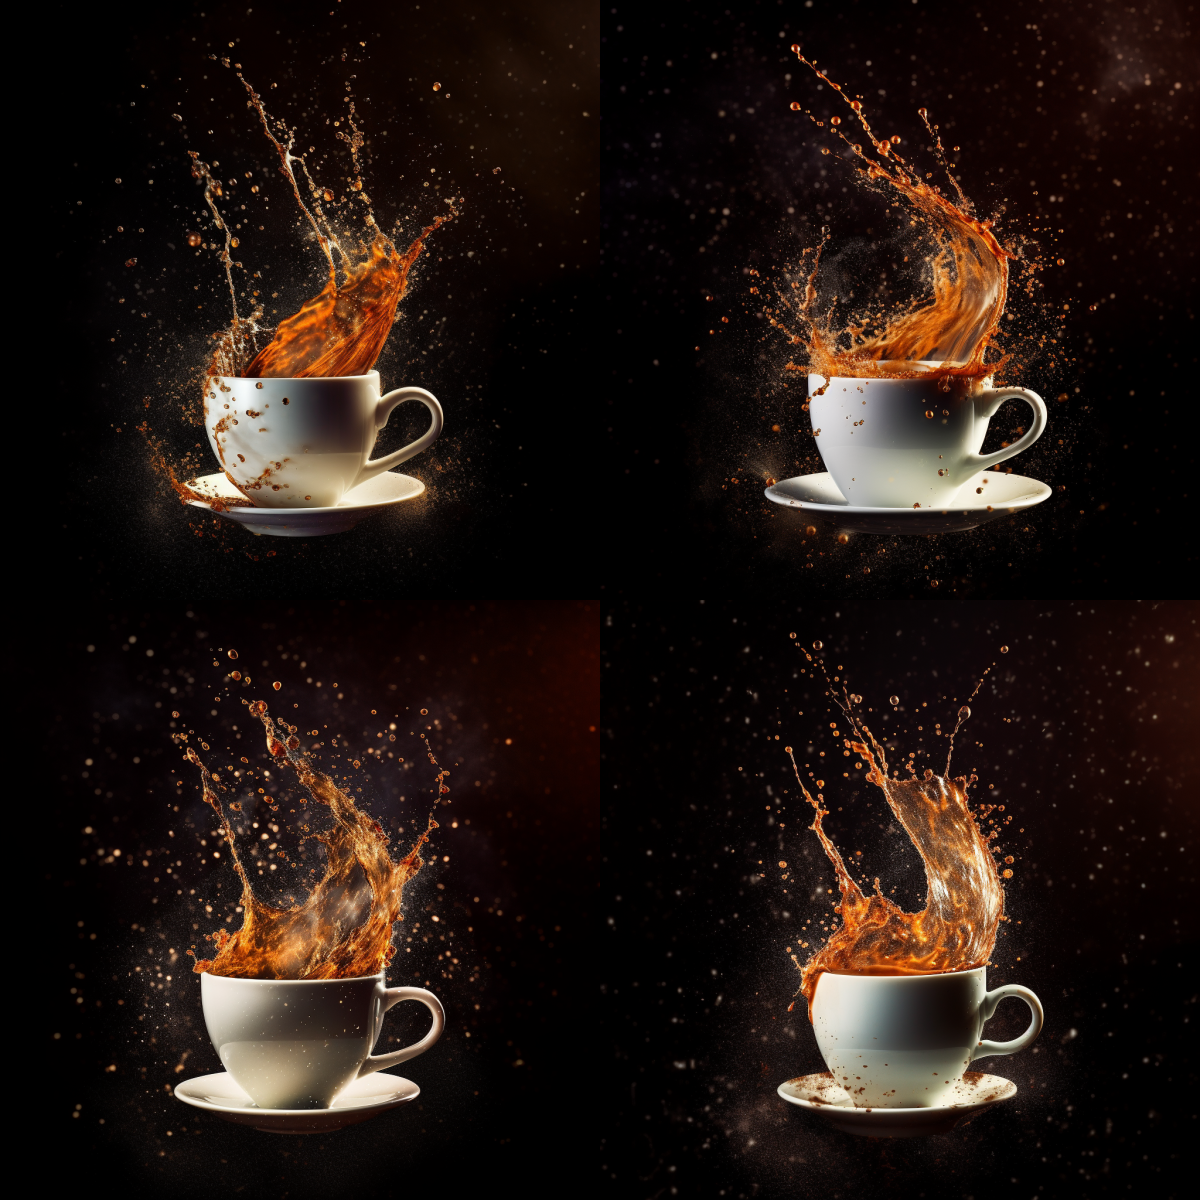 Senwater_a_splash_of_coffee_flying_in_the_space_1daa3a97-a0c9-4079-a029-0fb445401b63